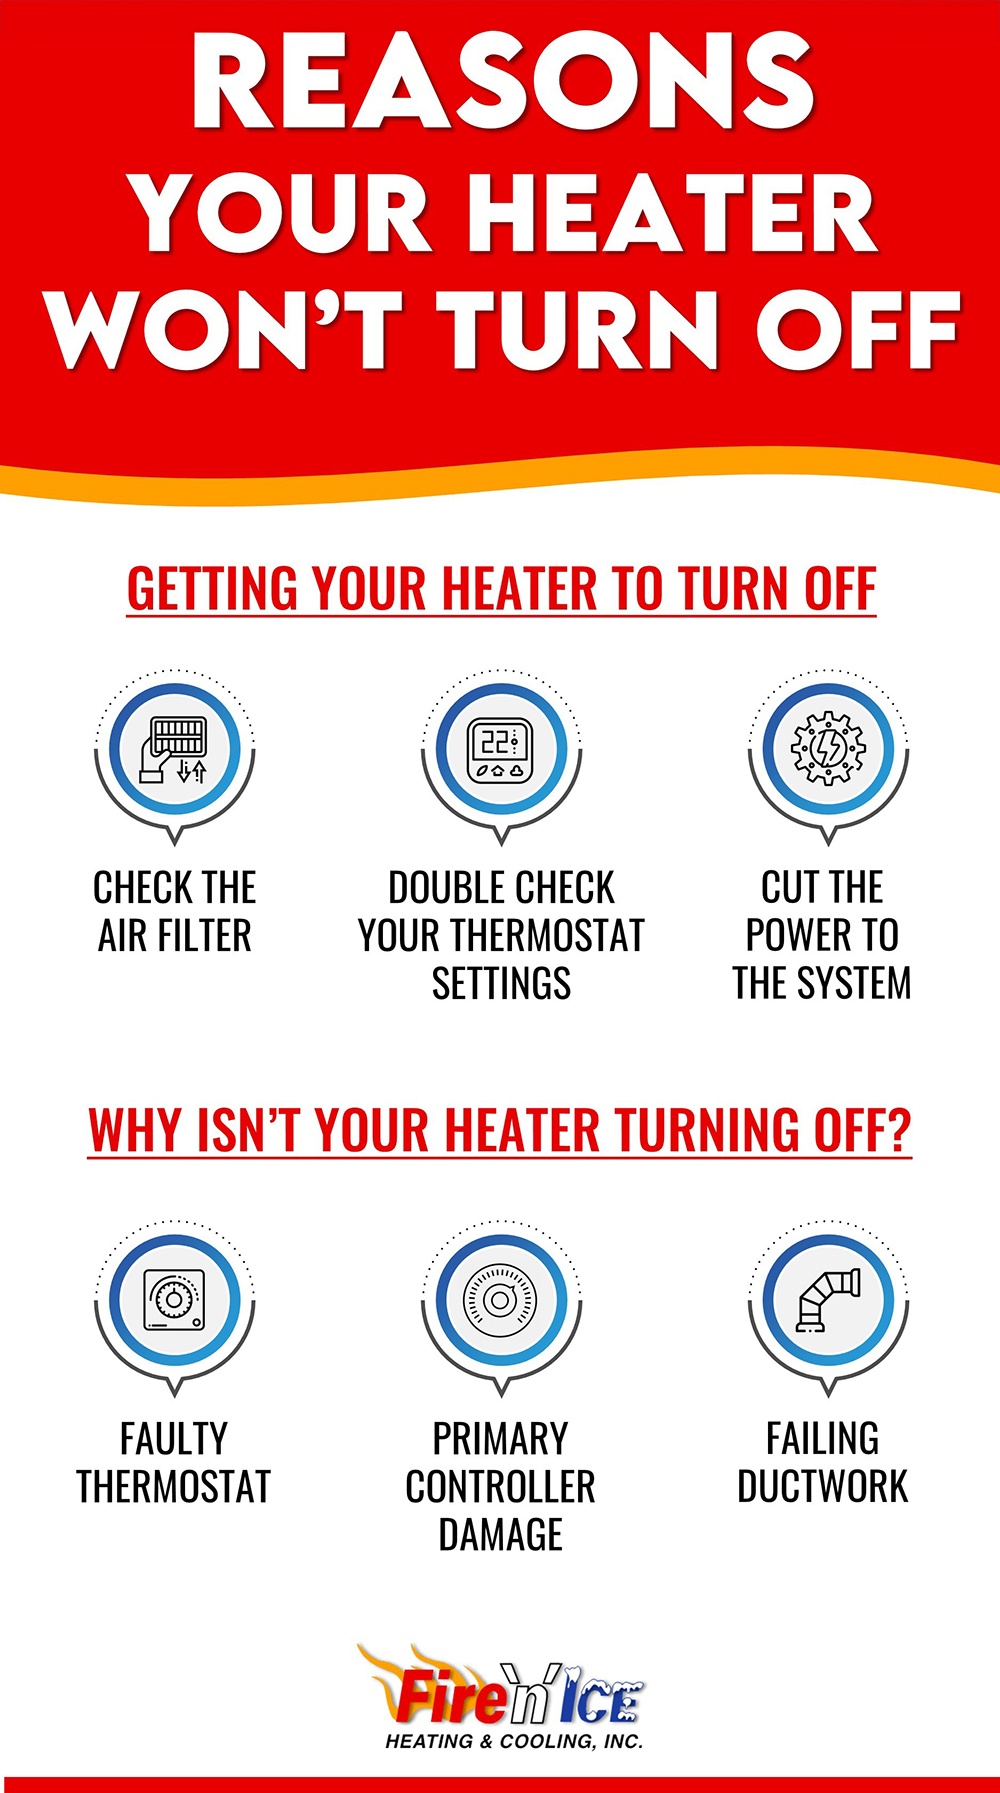 REASONS-YOUR-HEATER-WONT-TURN-OFF-scaled